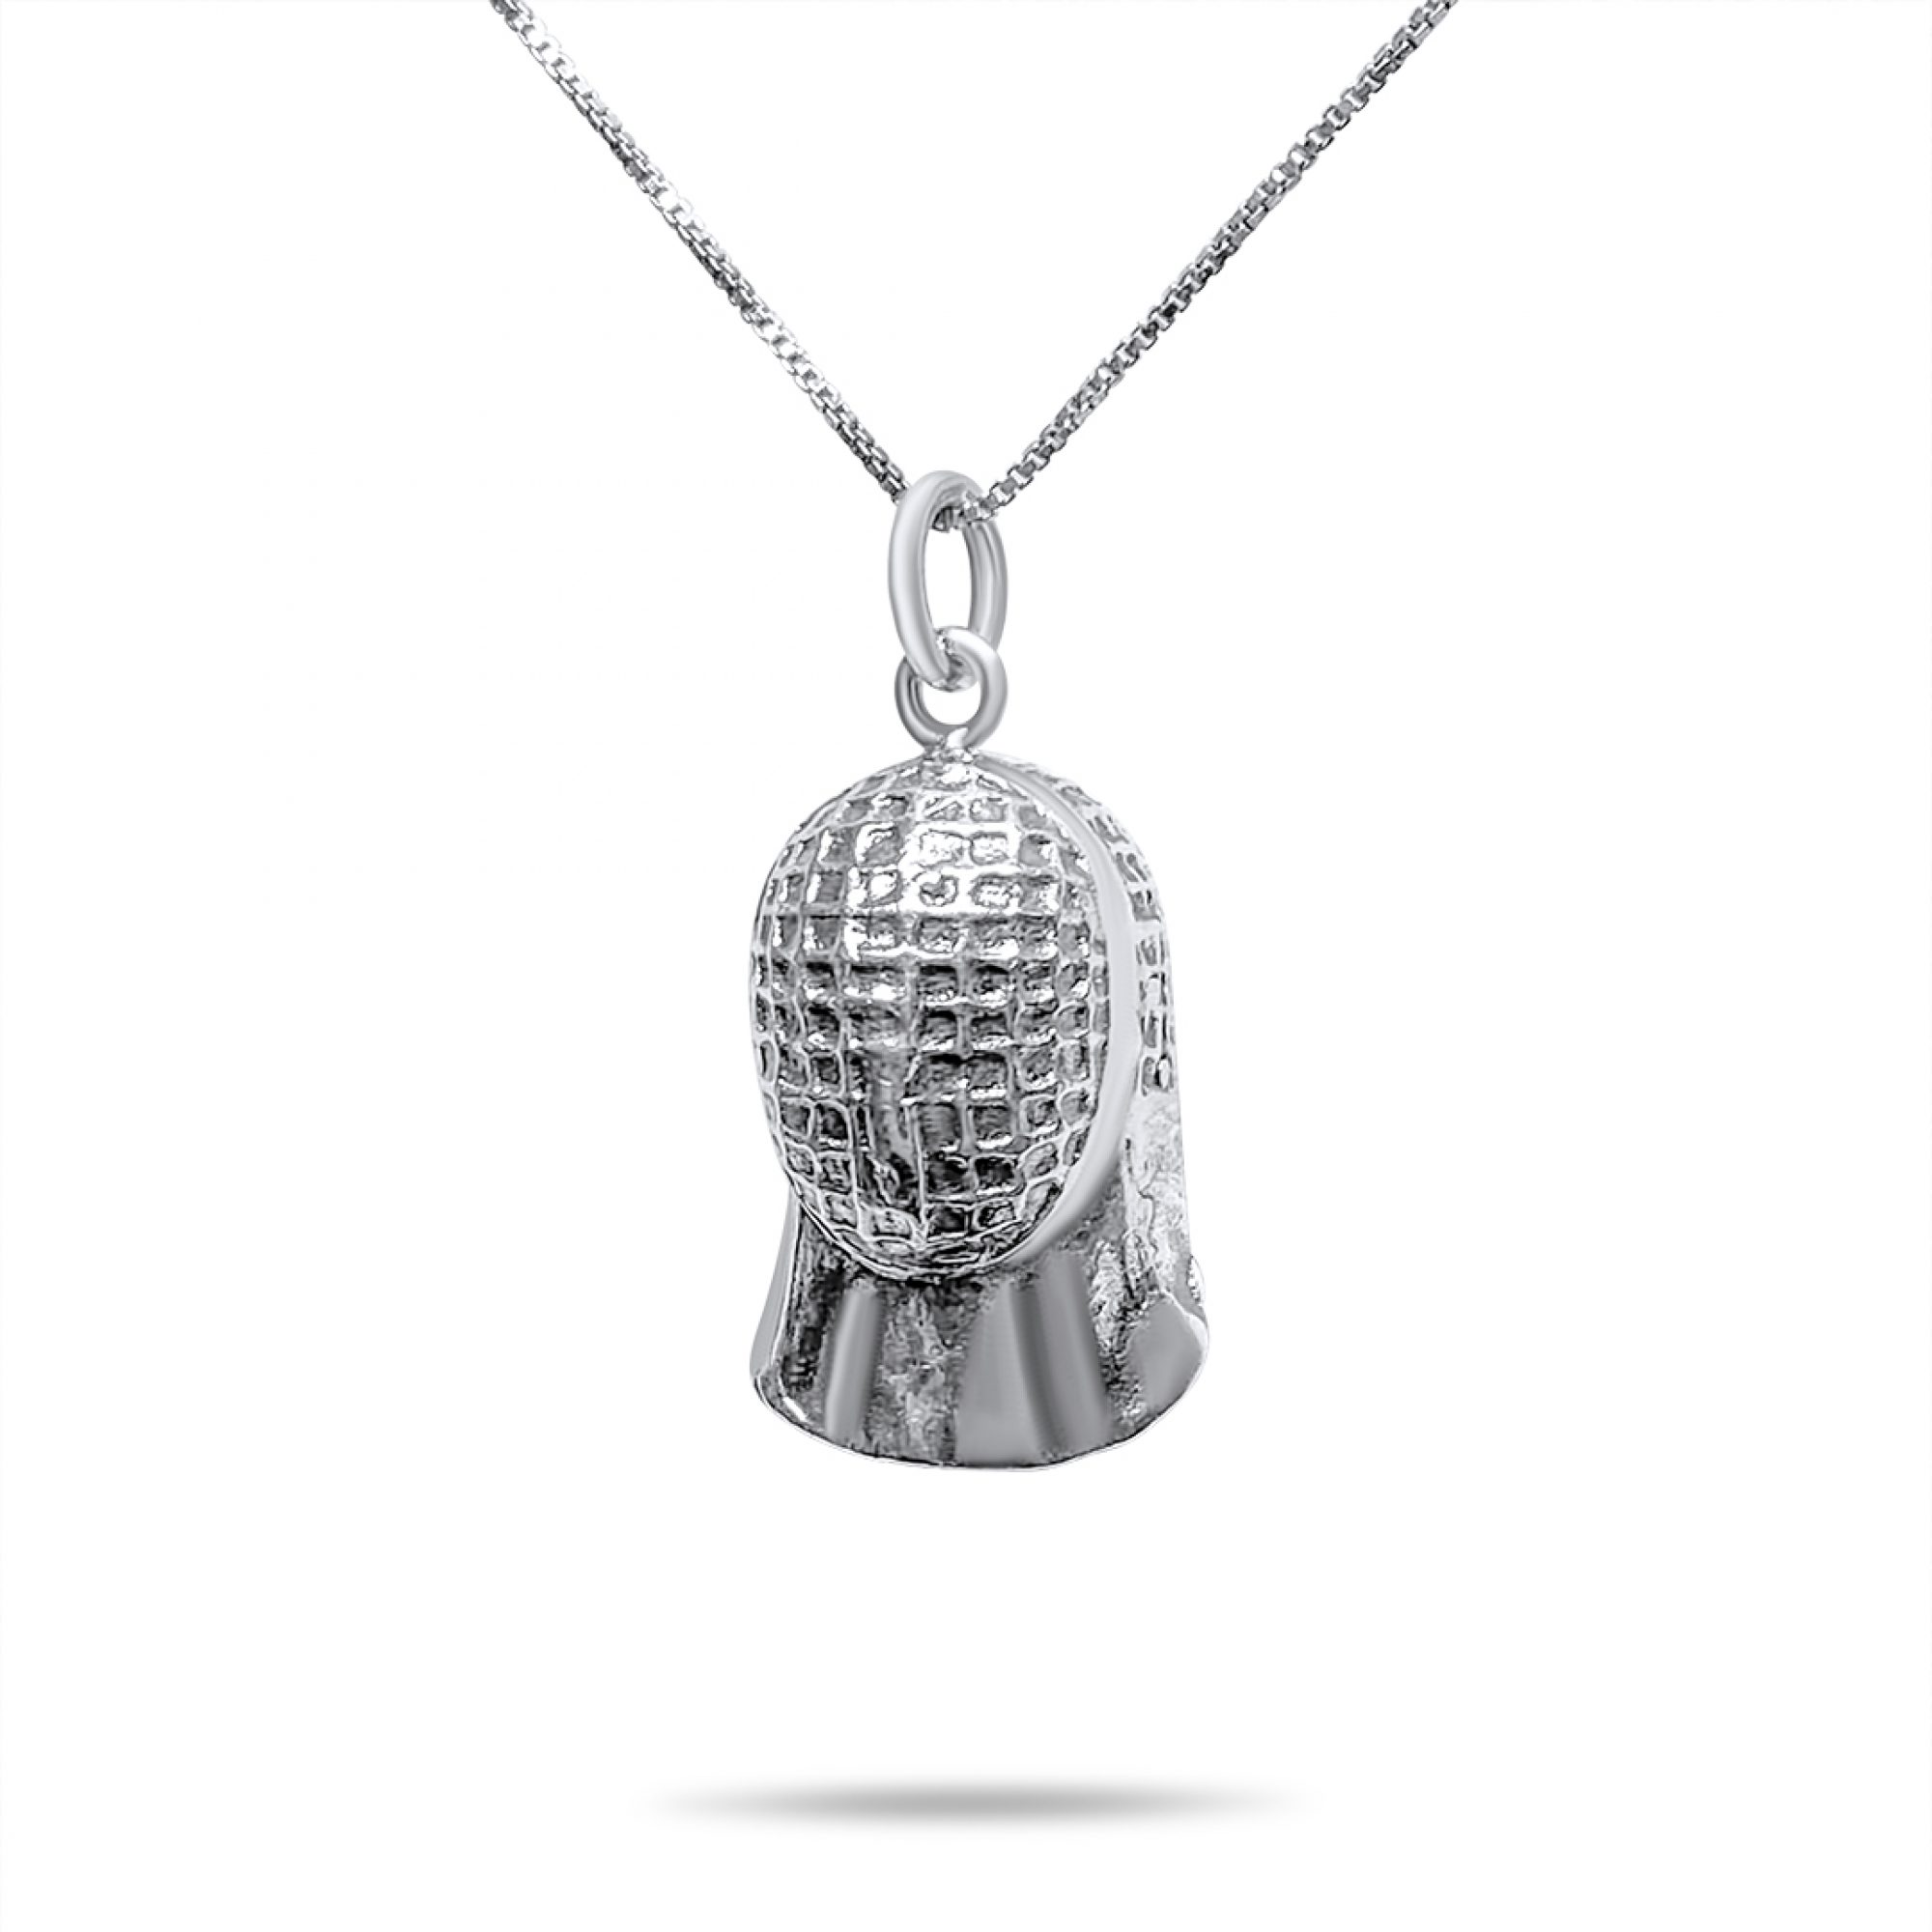 Fencing mask necklace